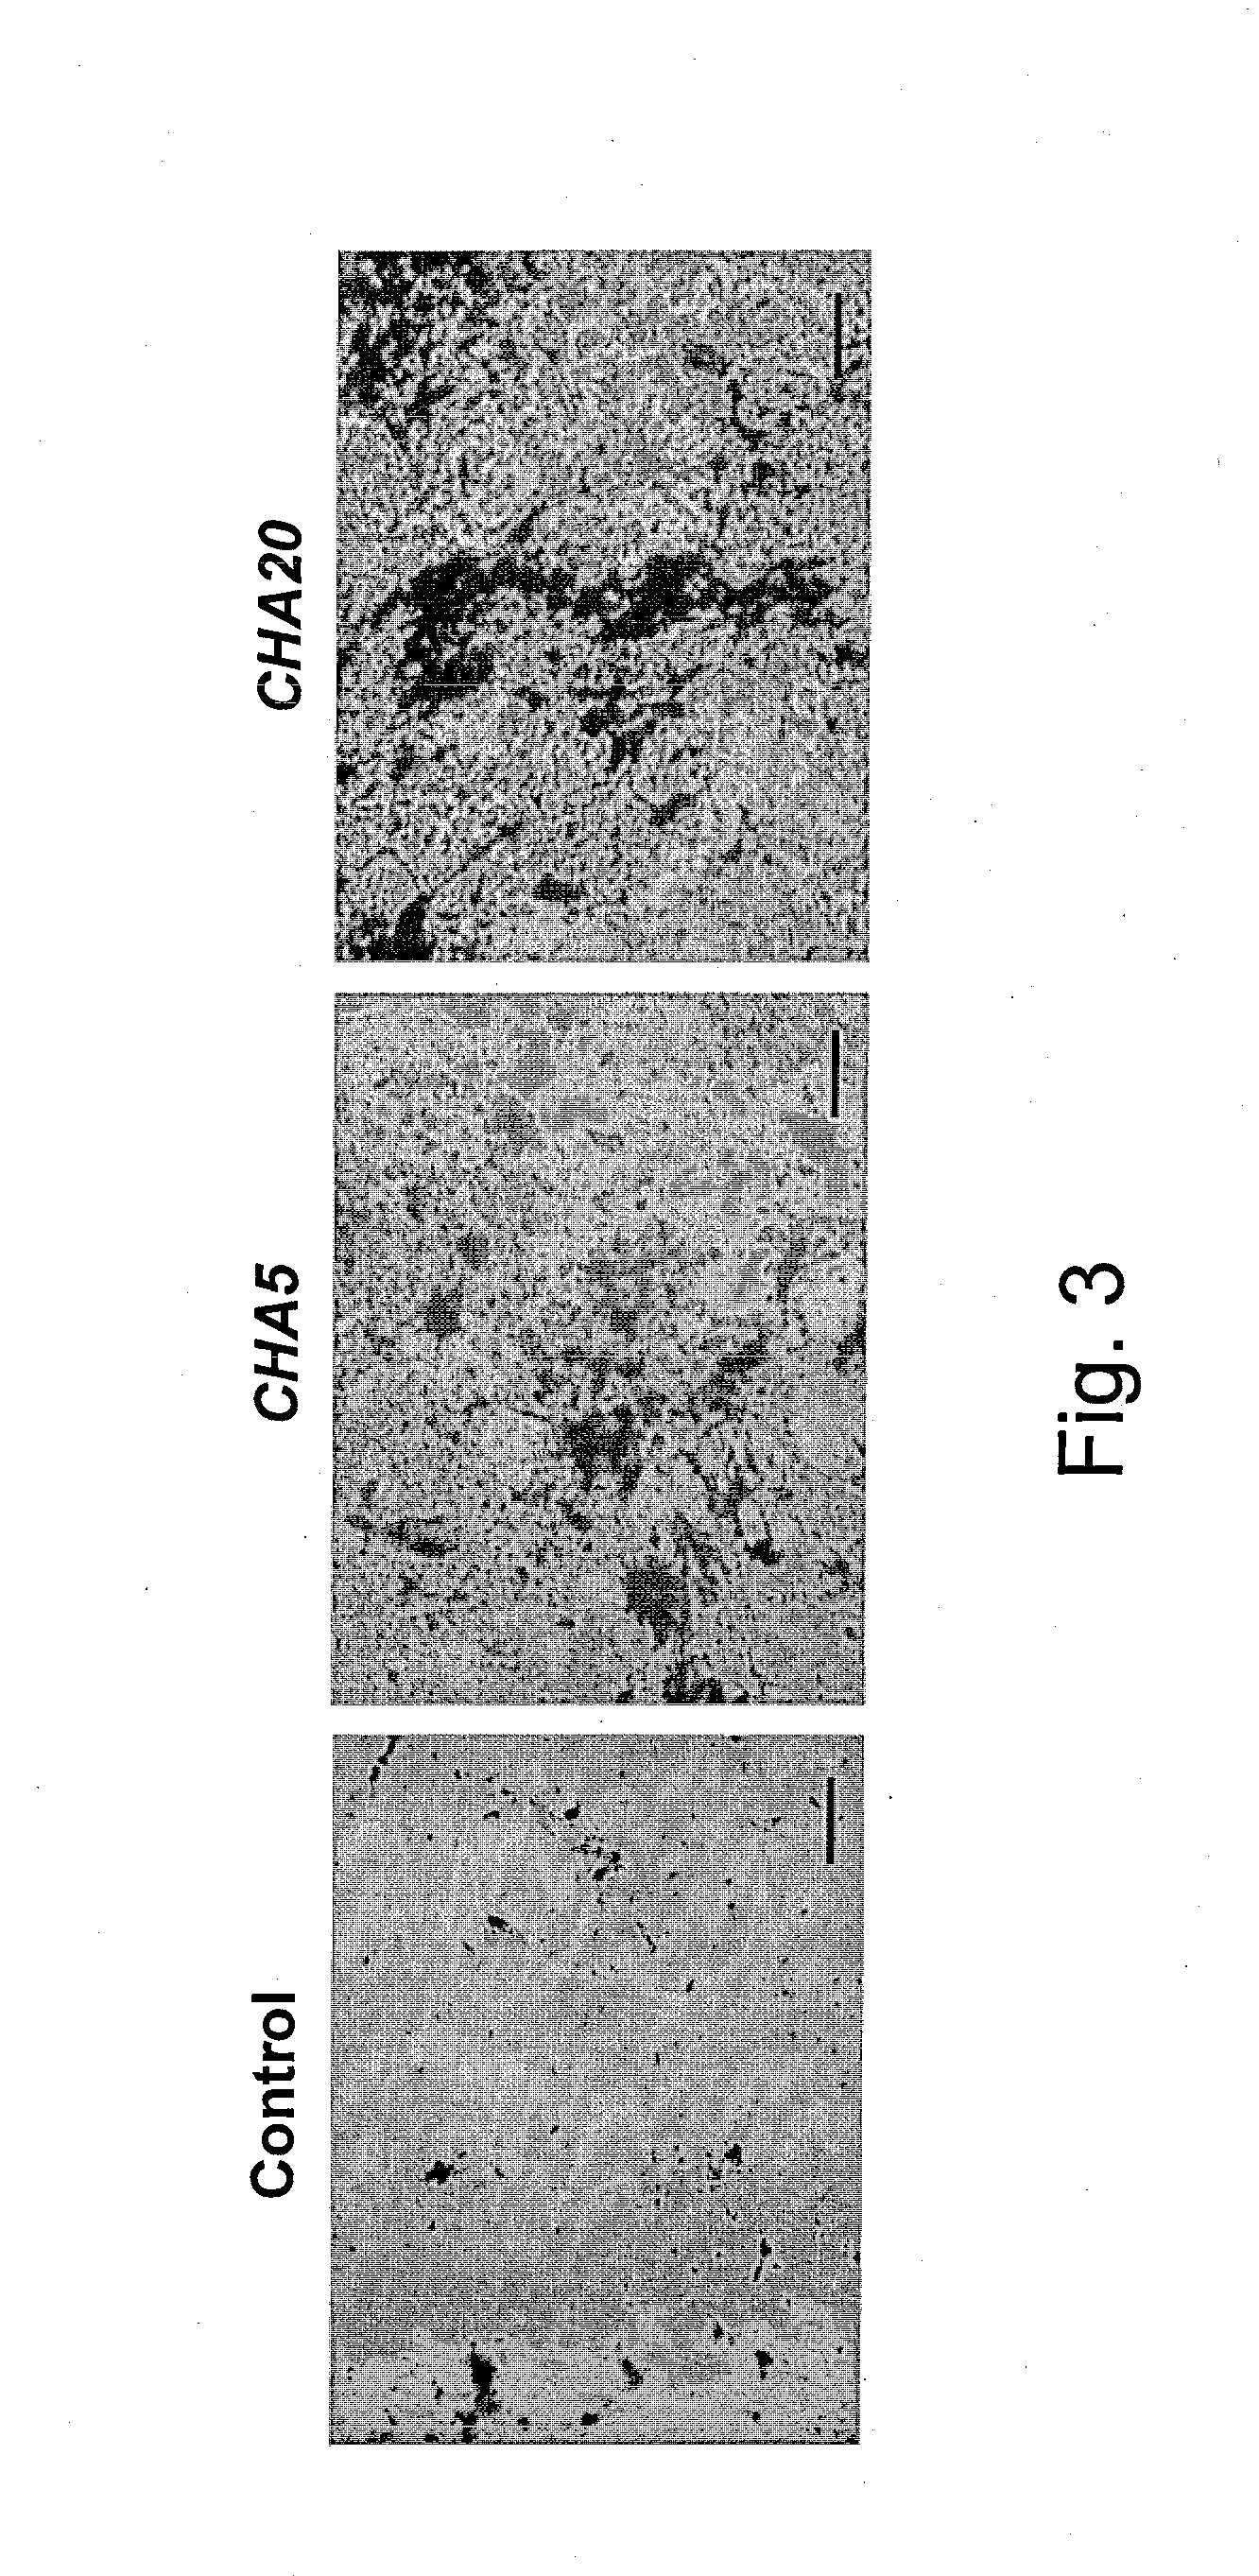 Method for preserving proliferation and differentiation potential of undiffrentiated cells